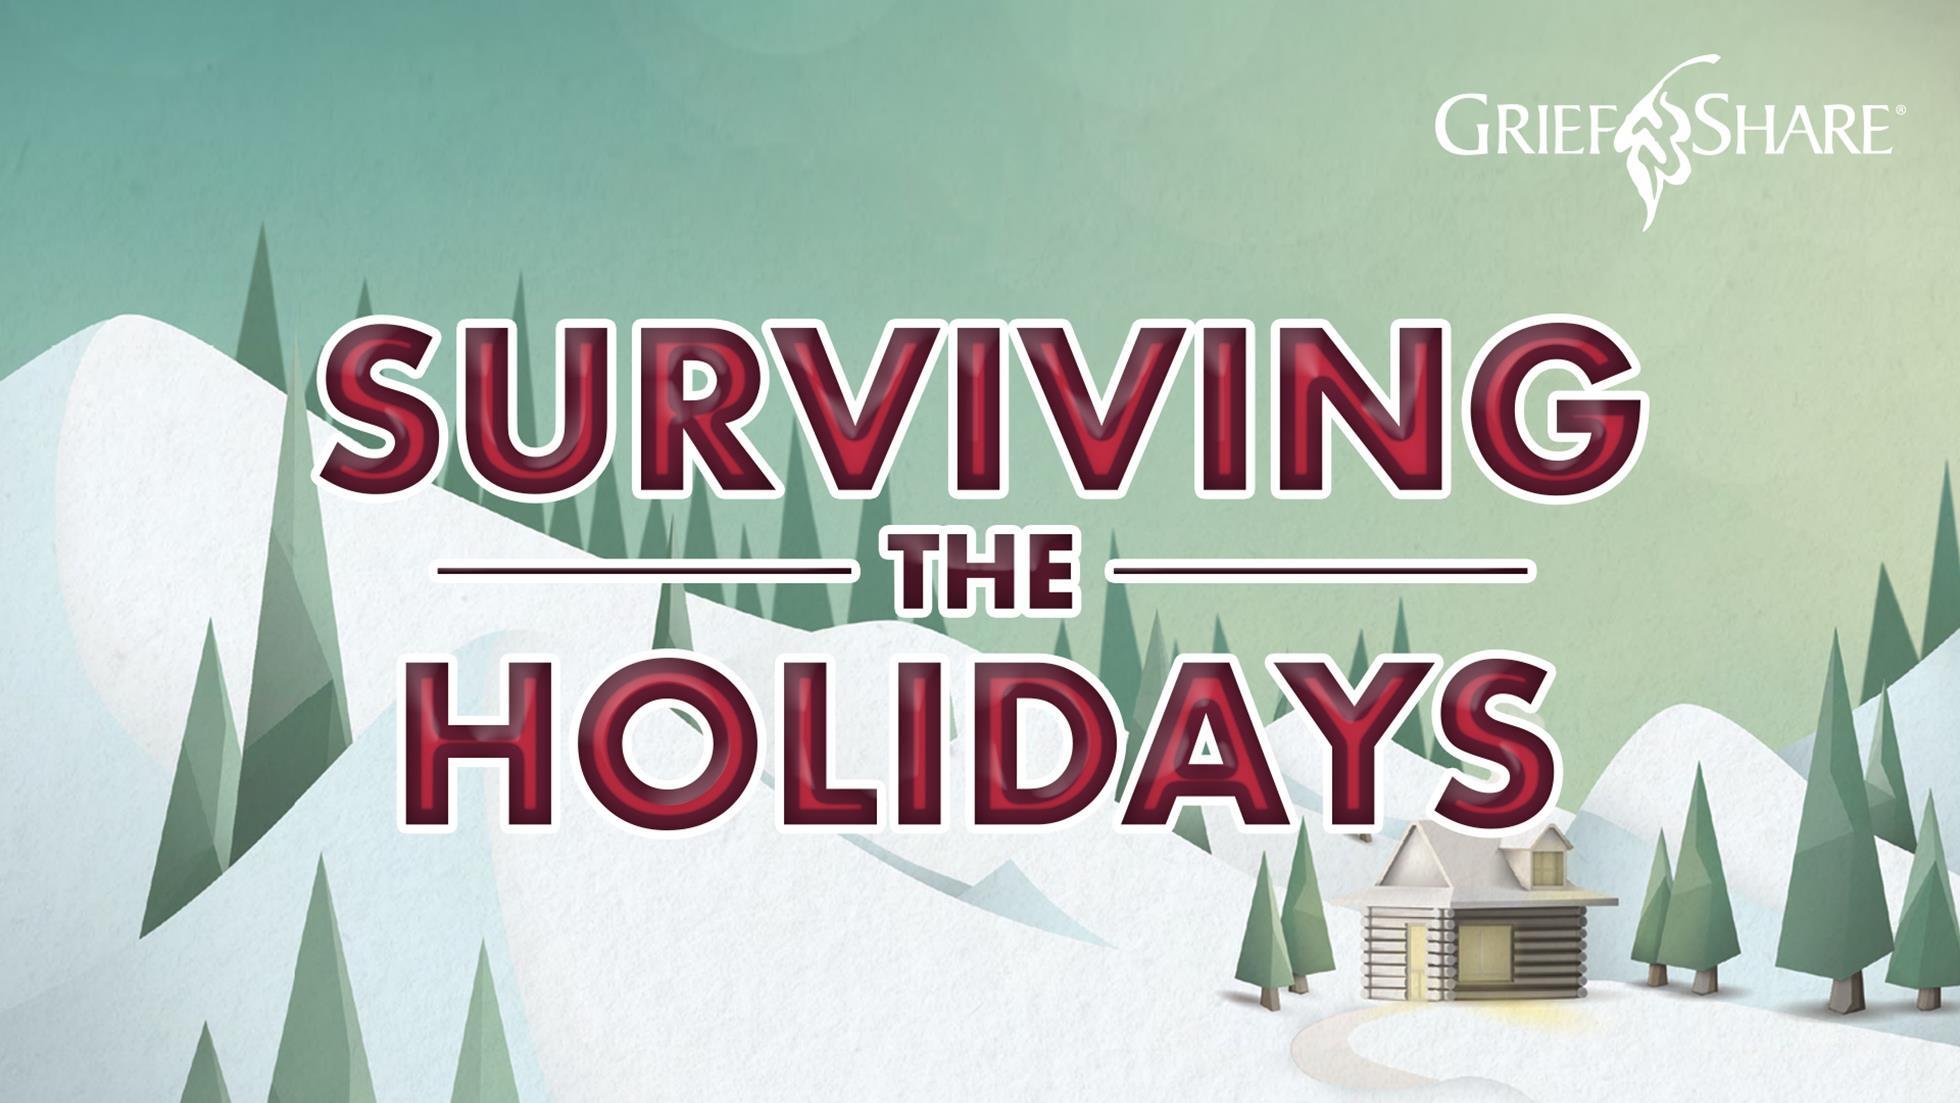 Griefshare Surviving the Holidays